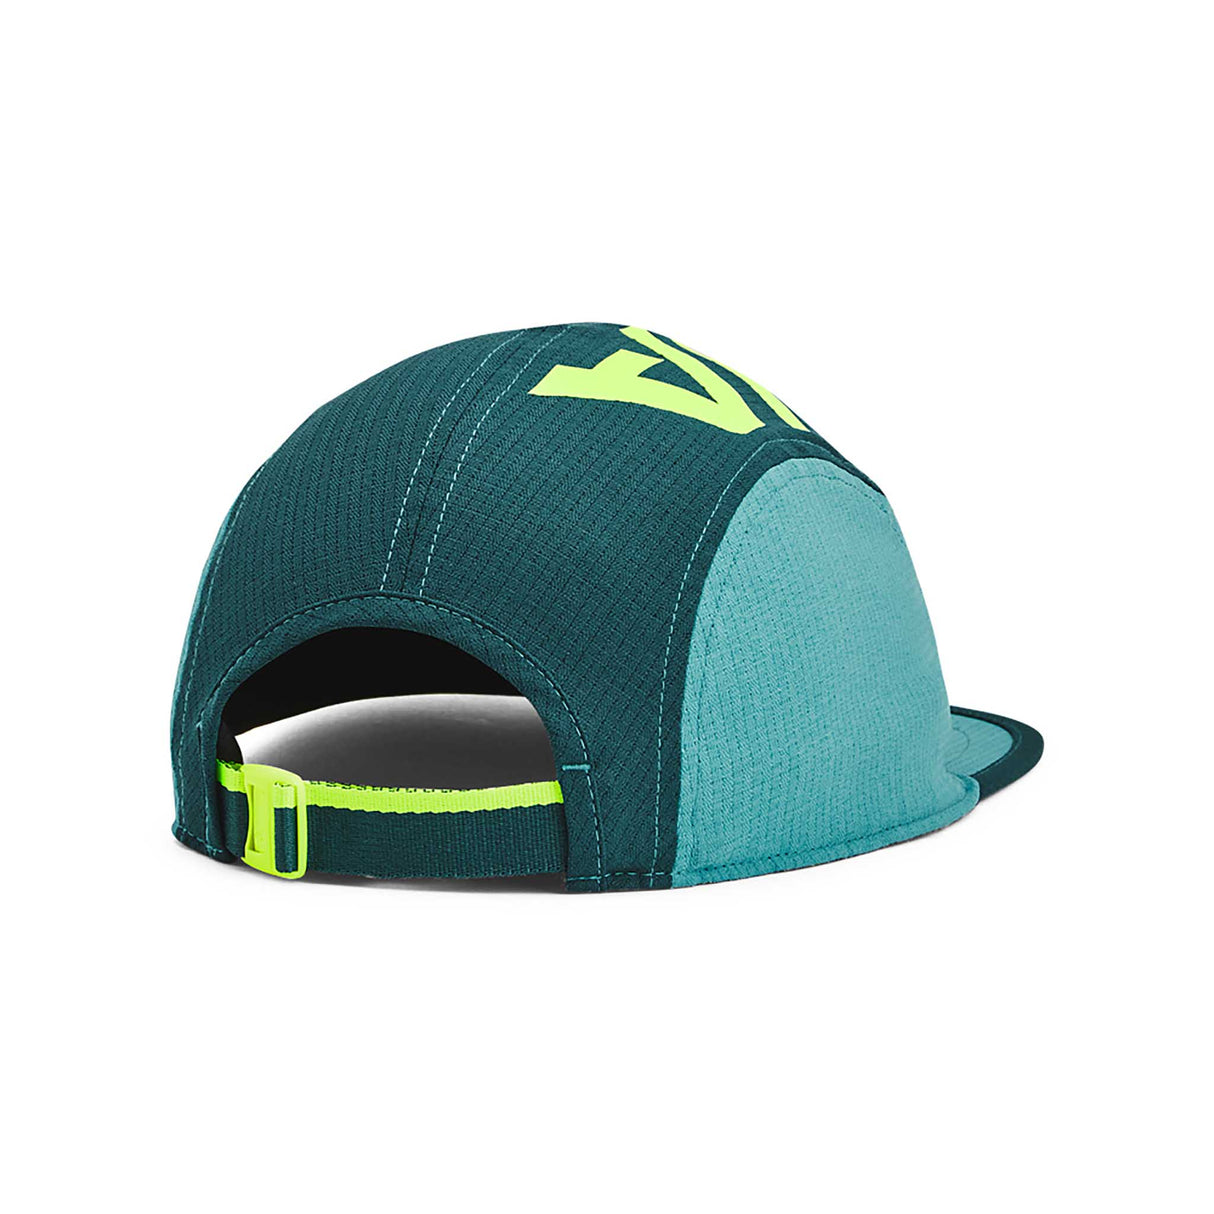 Under Armour ArmourVent casquette homme dos -Circuit Teal / High Vis Yellow